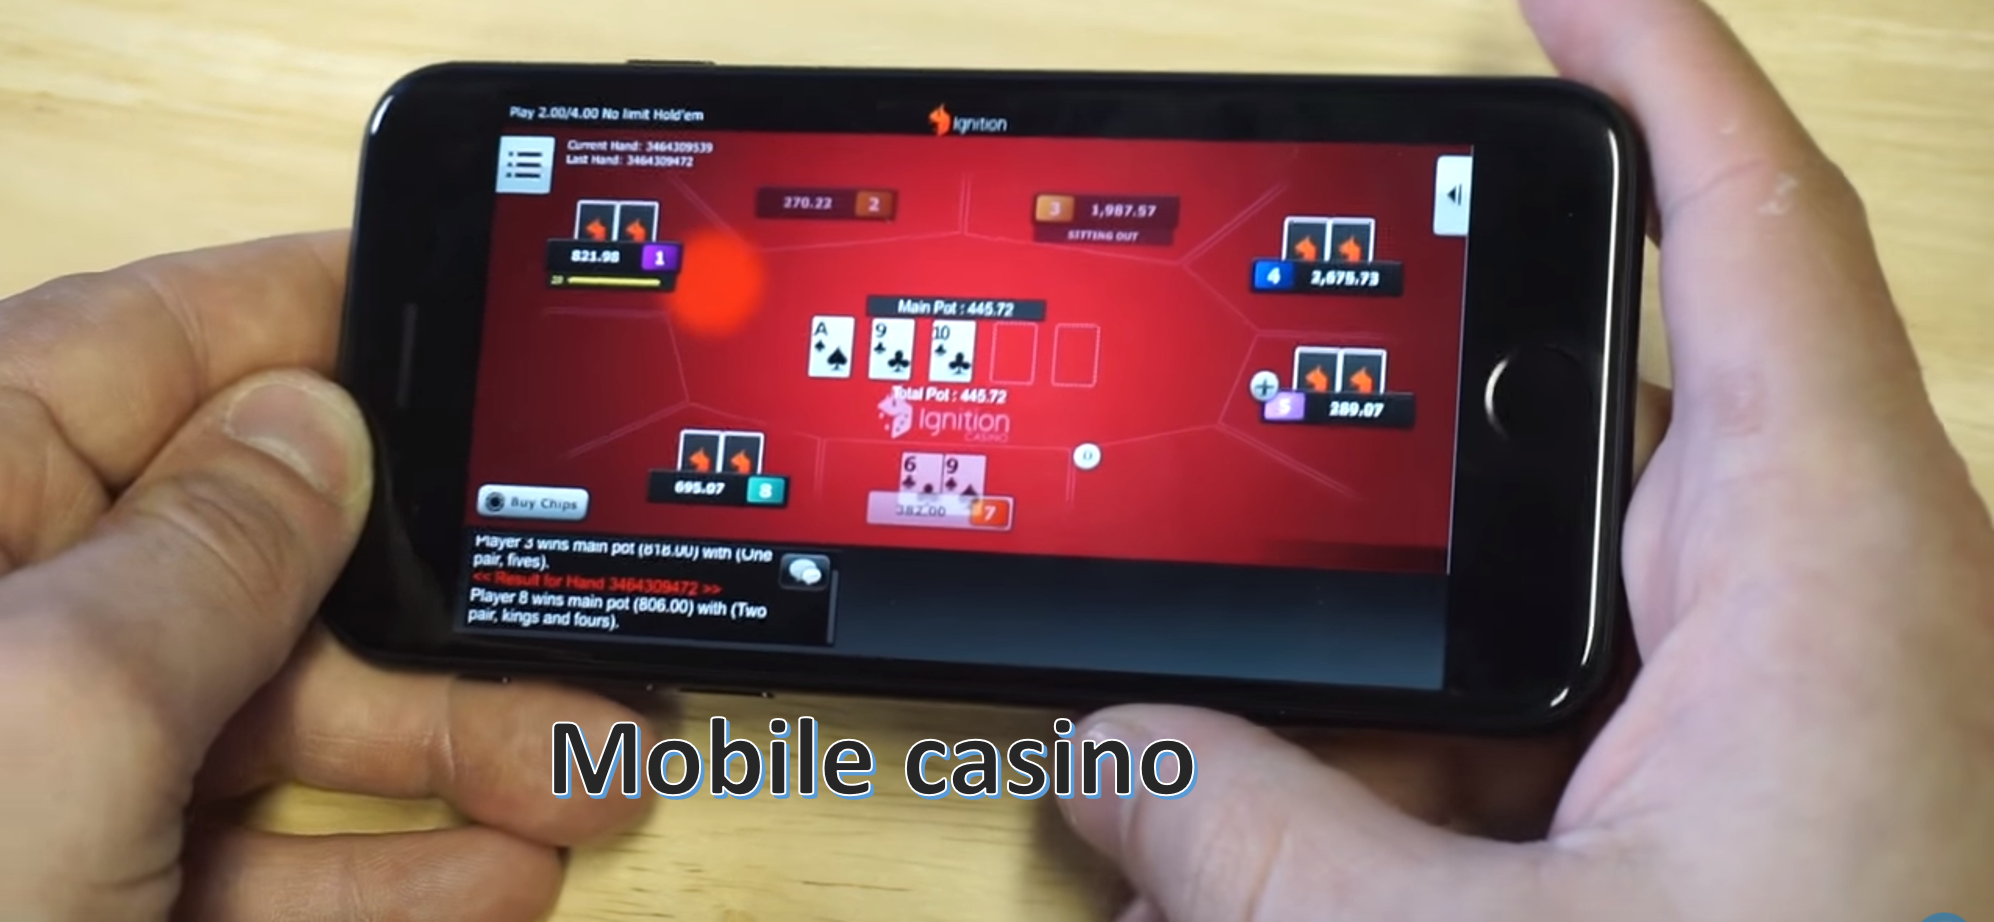 https://onlinegambling.com.ph/wp-content/uploads/2019/05/mobile-picture-2.png